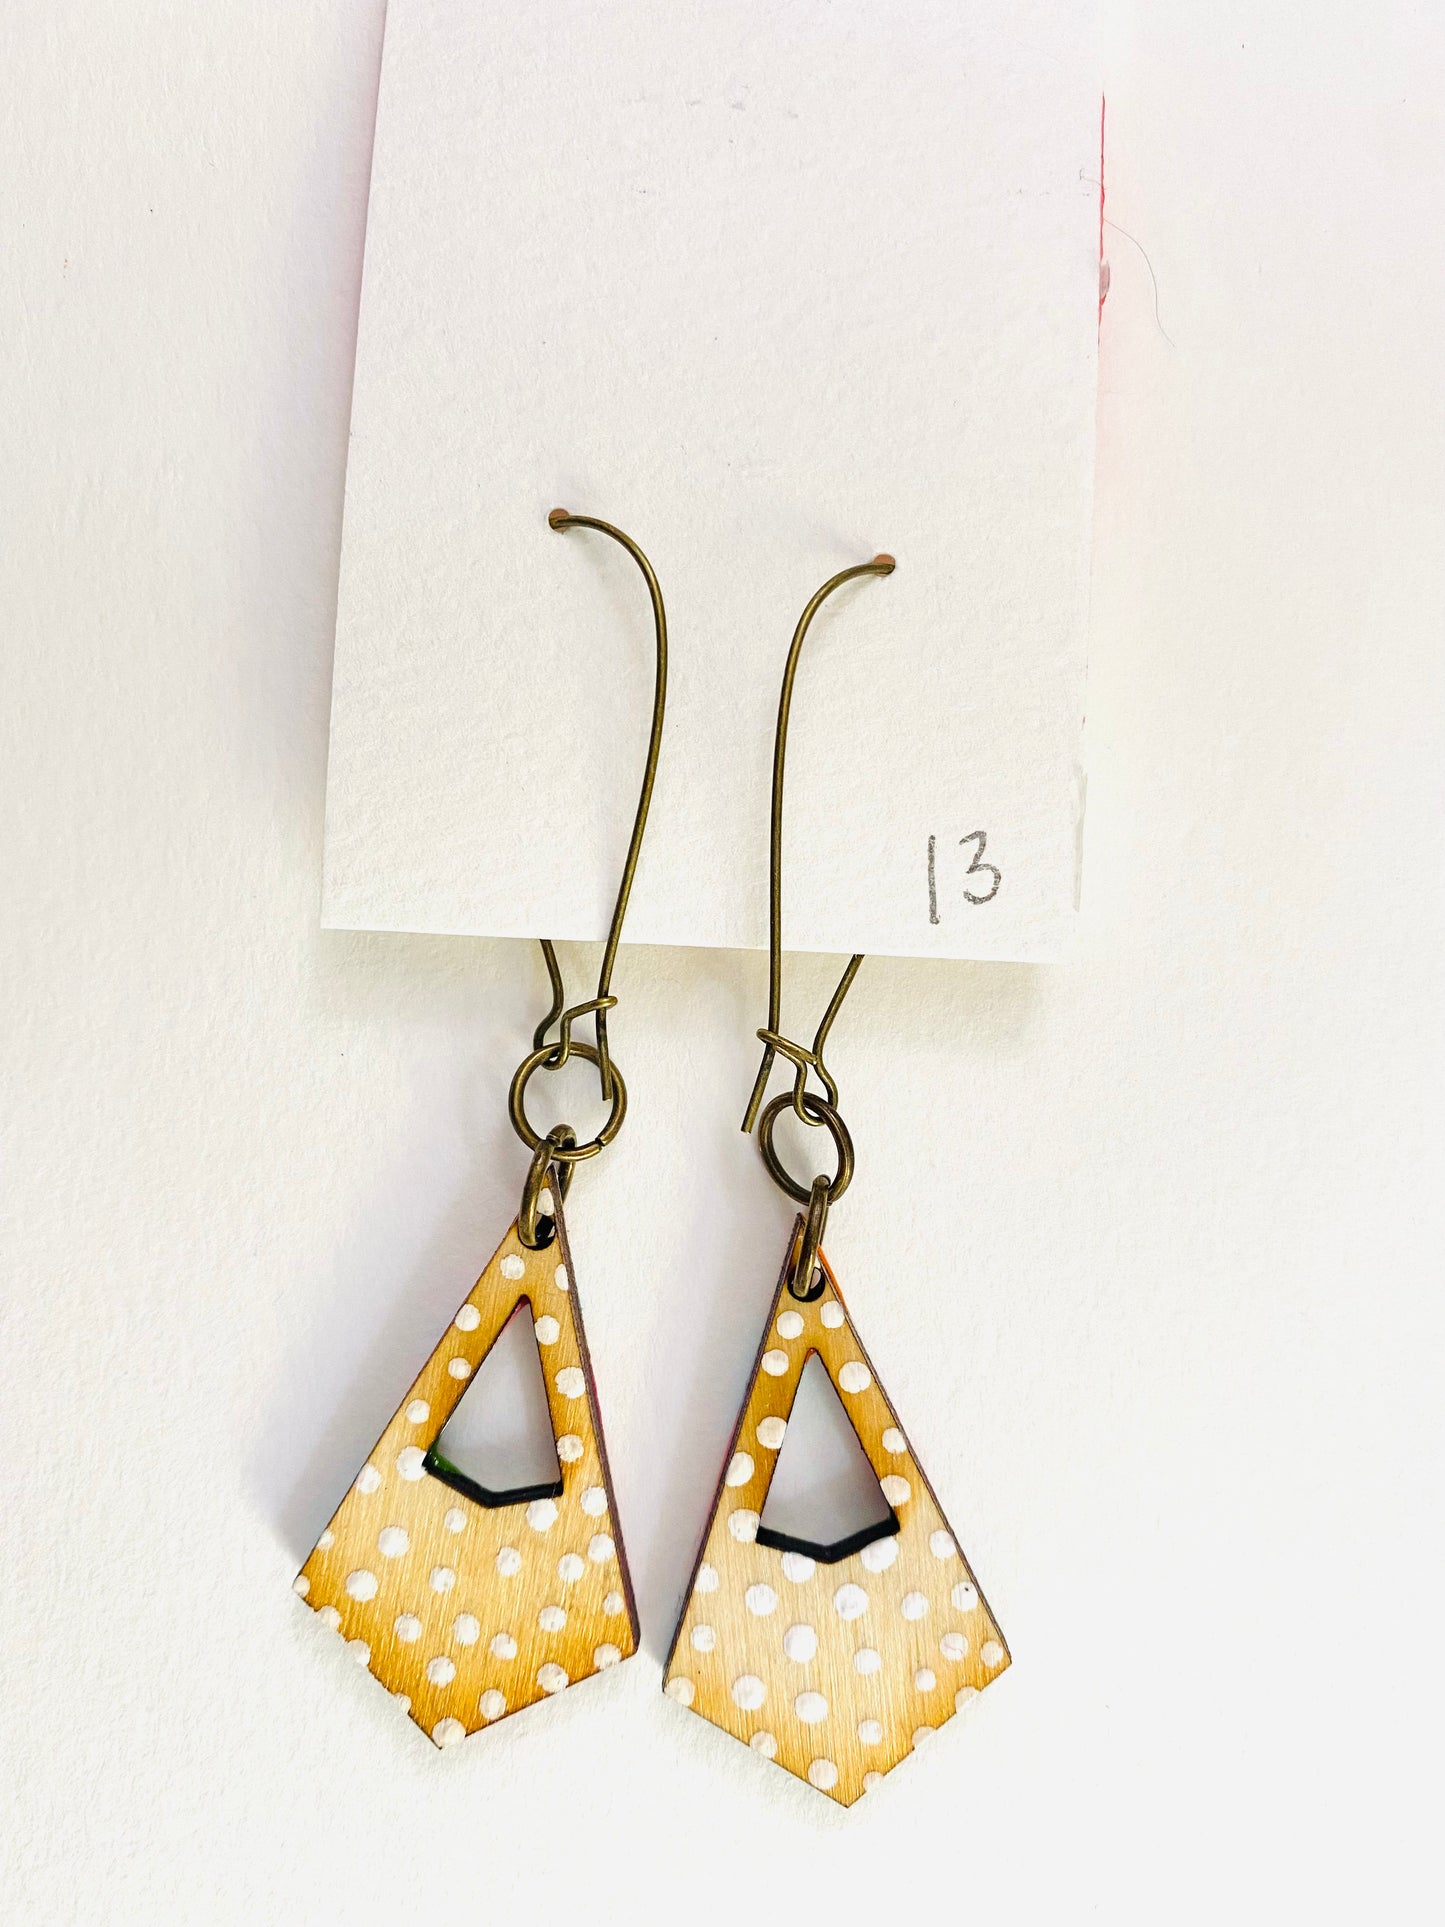 Colorful, Hand Painted, Geometric Shaped Earrings 13